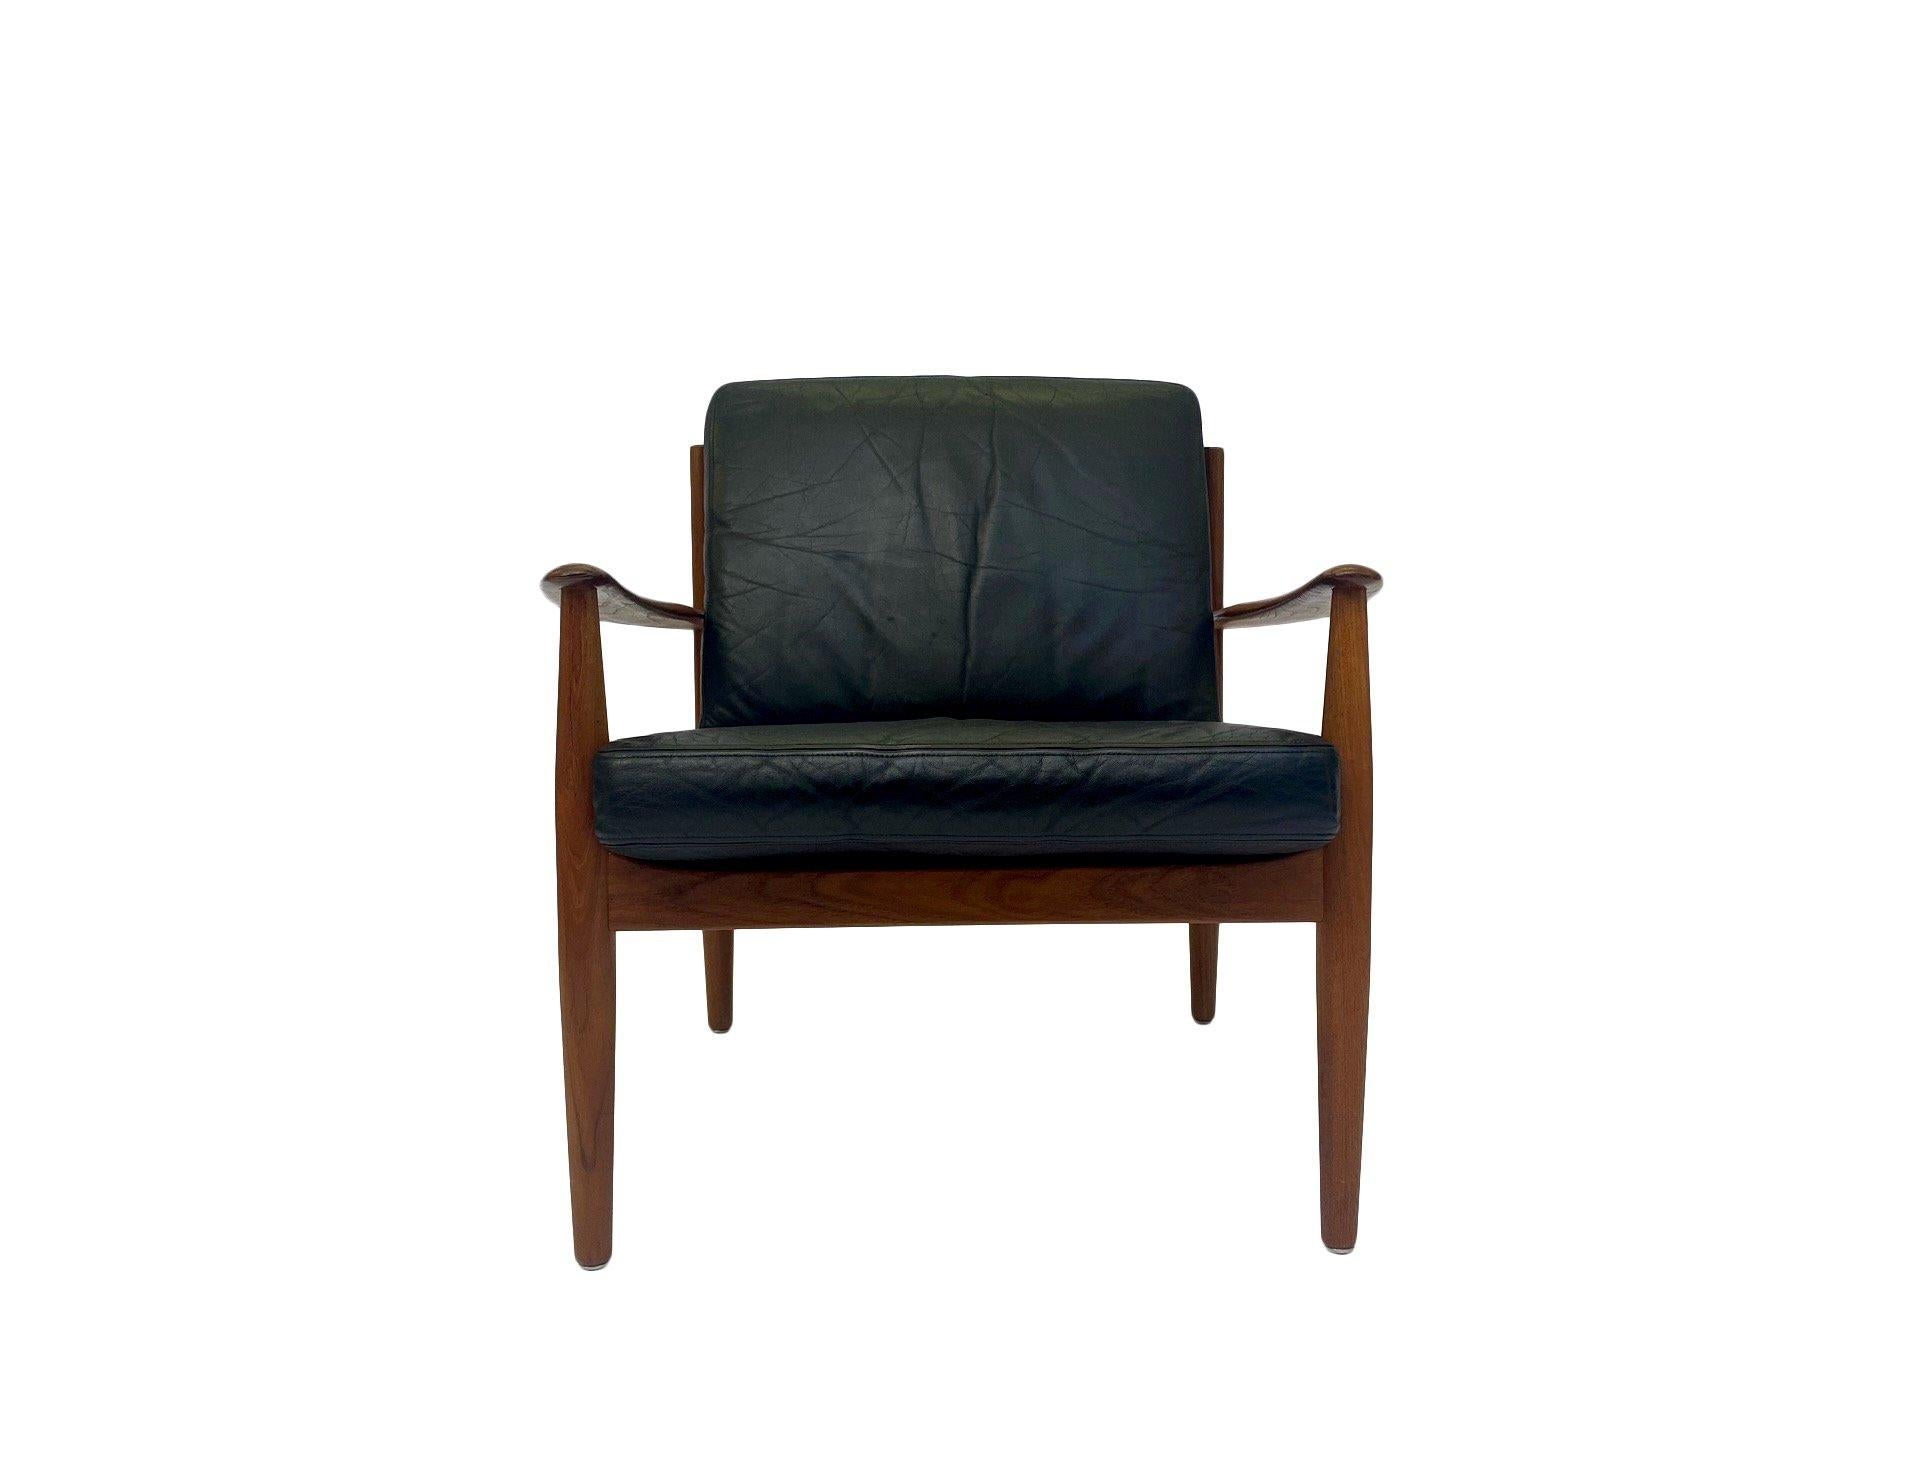 A beautiful Danish iconic teak and black leather lounge armchair designed by Grete Jalk for France & Søn in the 1960s, this would make a stylish addition to any living or work area. A striking piece of classic Scandinavian furniture.

The chair is